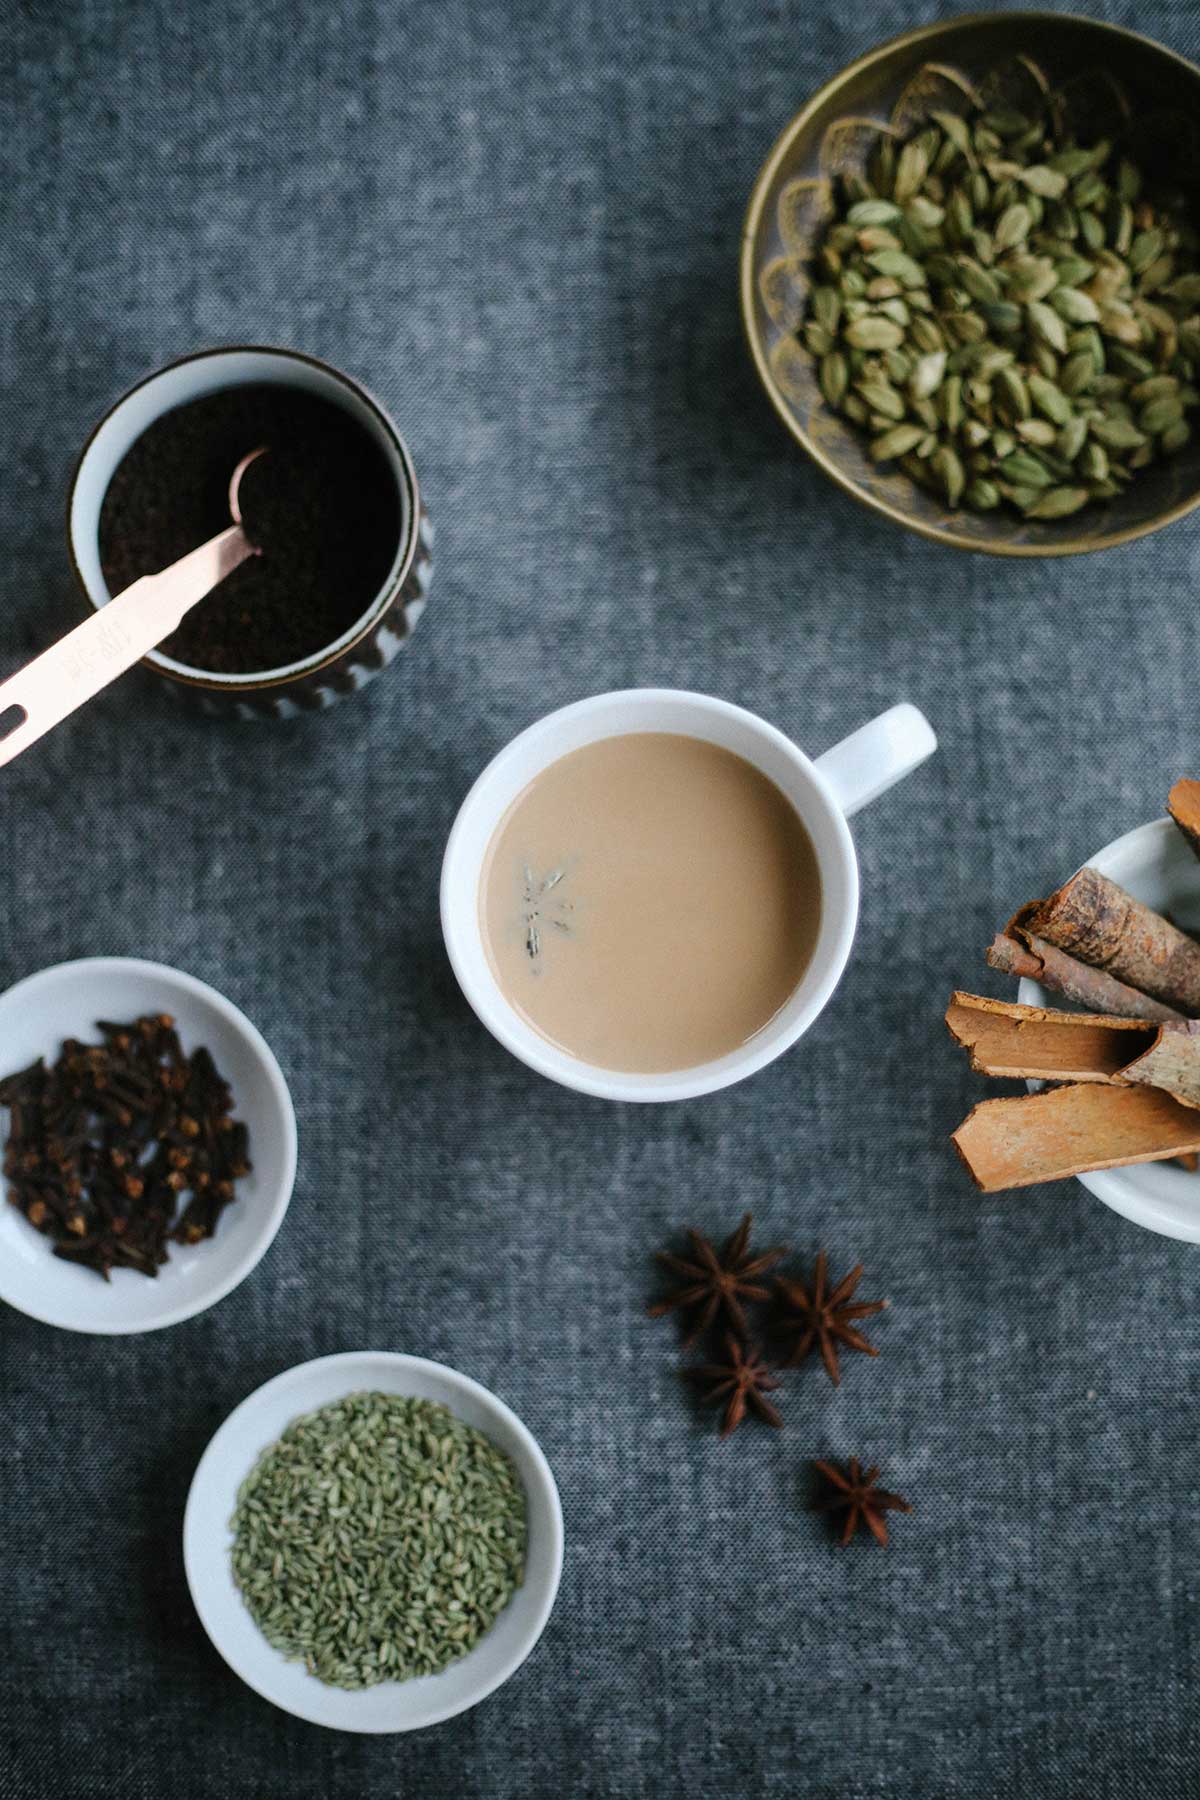 Masala chai tea for keto and low carb. Authentic Indian recipe with whole spices from scratch.